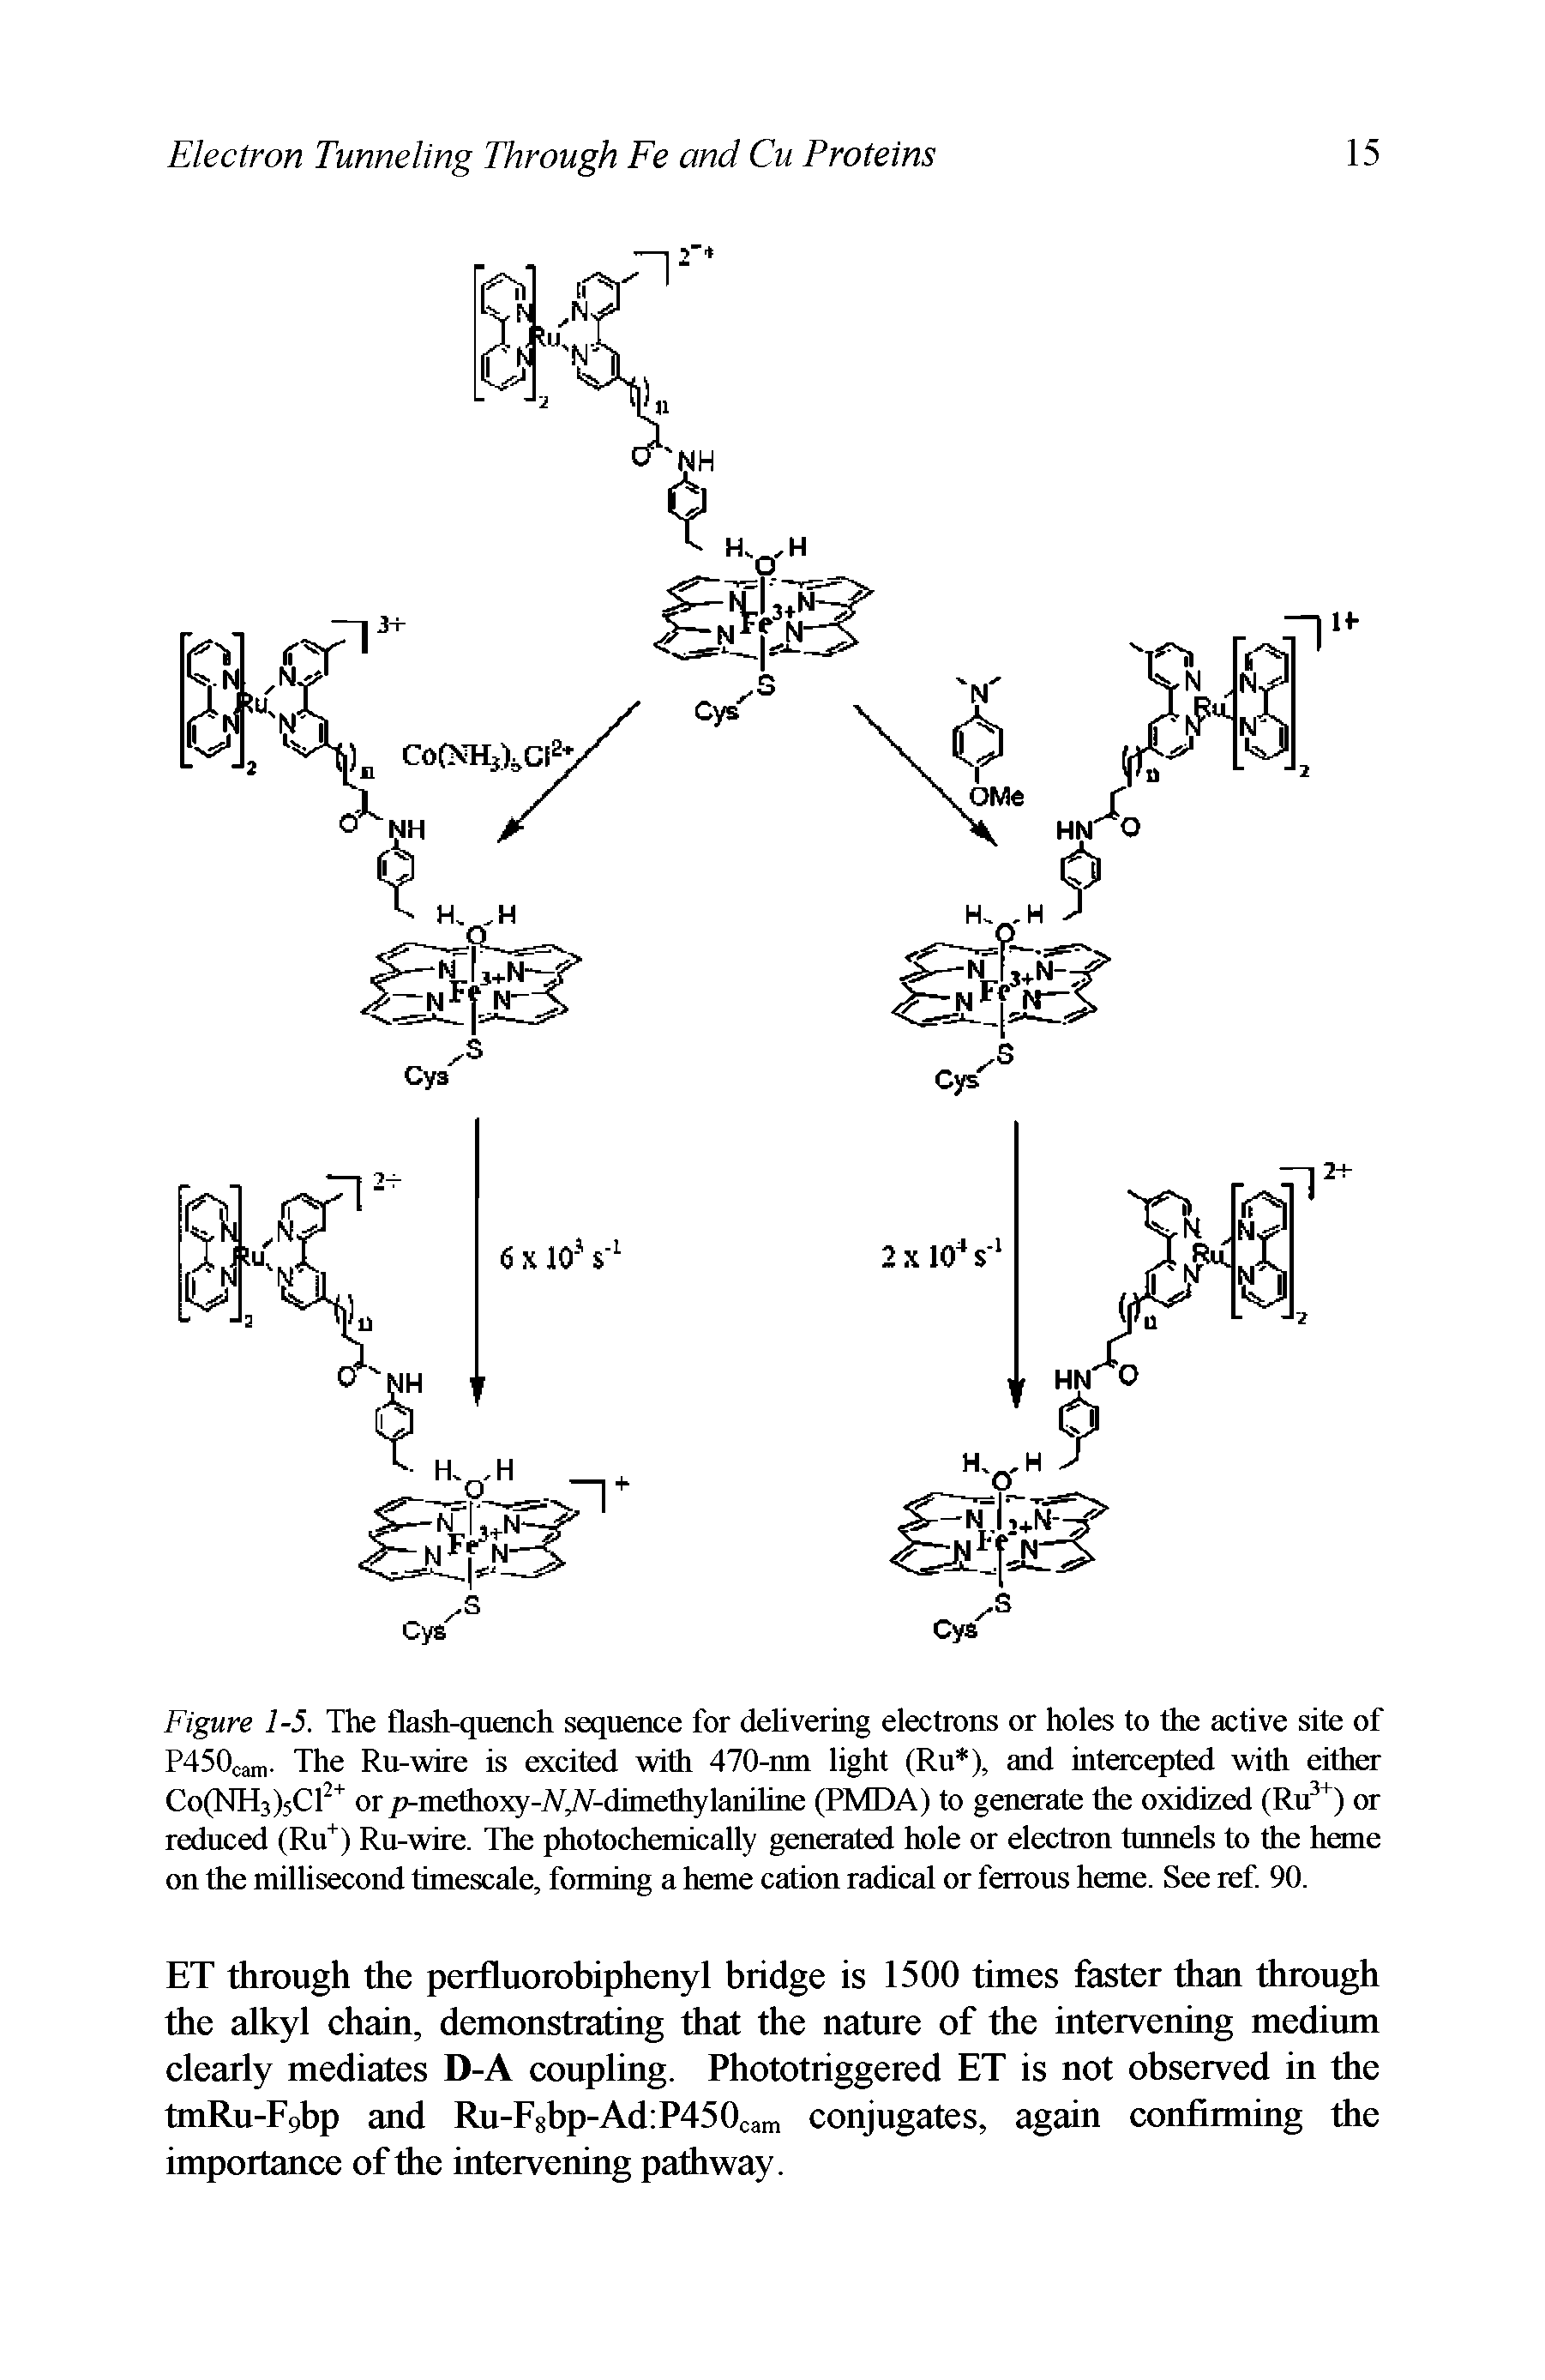 Figure 1-5. The flash-quench sequence for deliver mg electrons or holes to the active site of P450cam. The Ru-wire is excited with 470-nin light (Ru ), and intercepted witli either CofNHjjsCT or p-methoxy-WgV-dimethylaniline (PMDA) to generate the oxidized (Ru ) or reduced (Rif) Ru-wire. The photochemically generated hole or electron tunnels to the heme on the millisecond timescale, forming a heme cation radical or ferrous heme. See ref. 90.